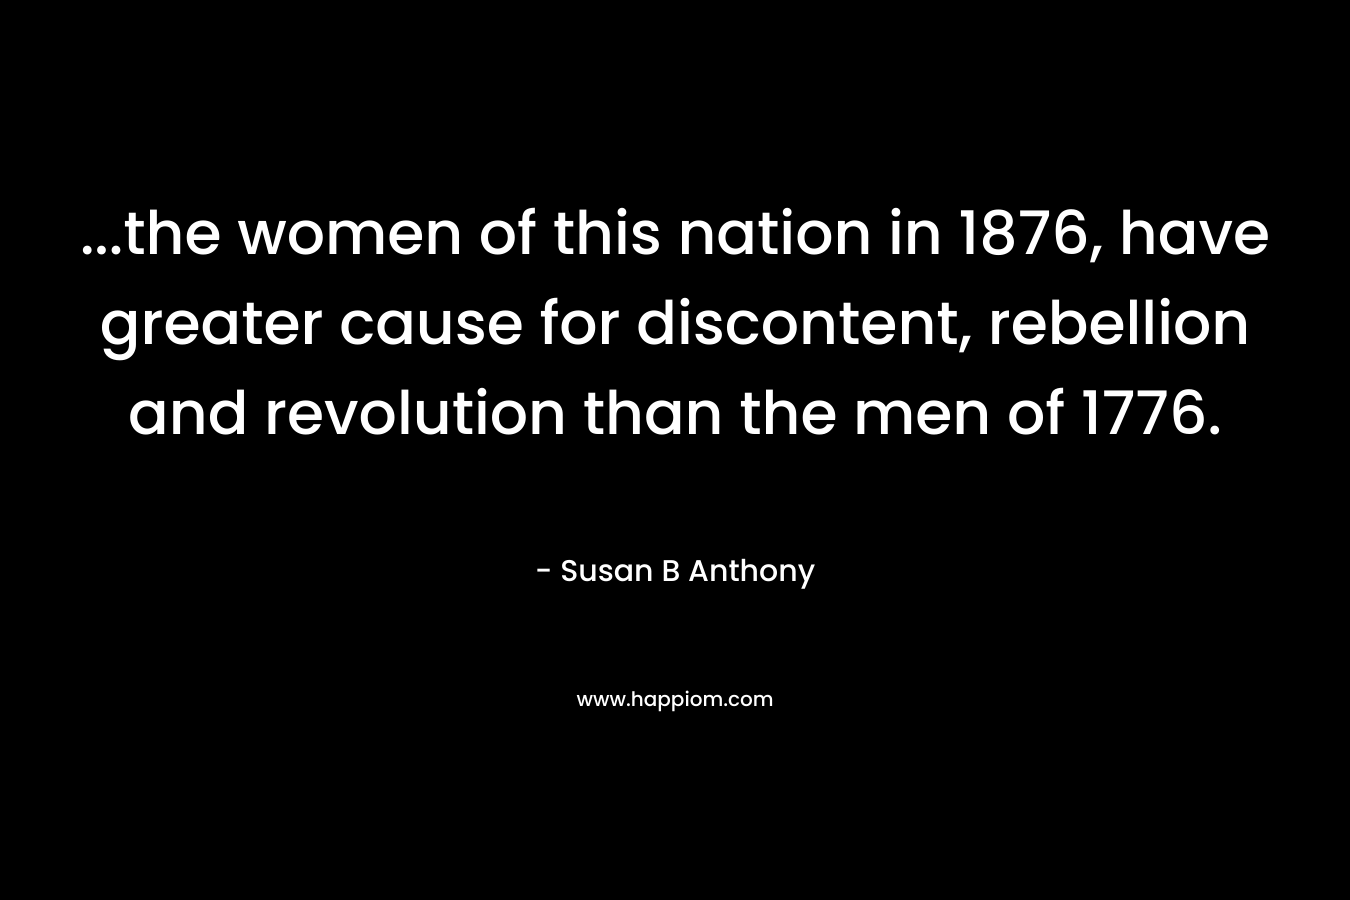 …the women of this nation in 1876, have greater cause for discontent, rebellion and revolution than the men of 1776. – Susan B Anthony